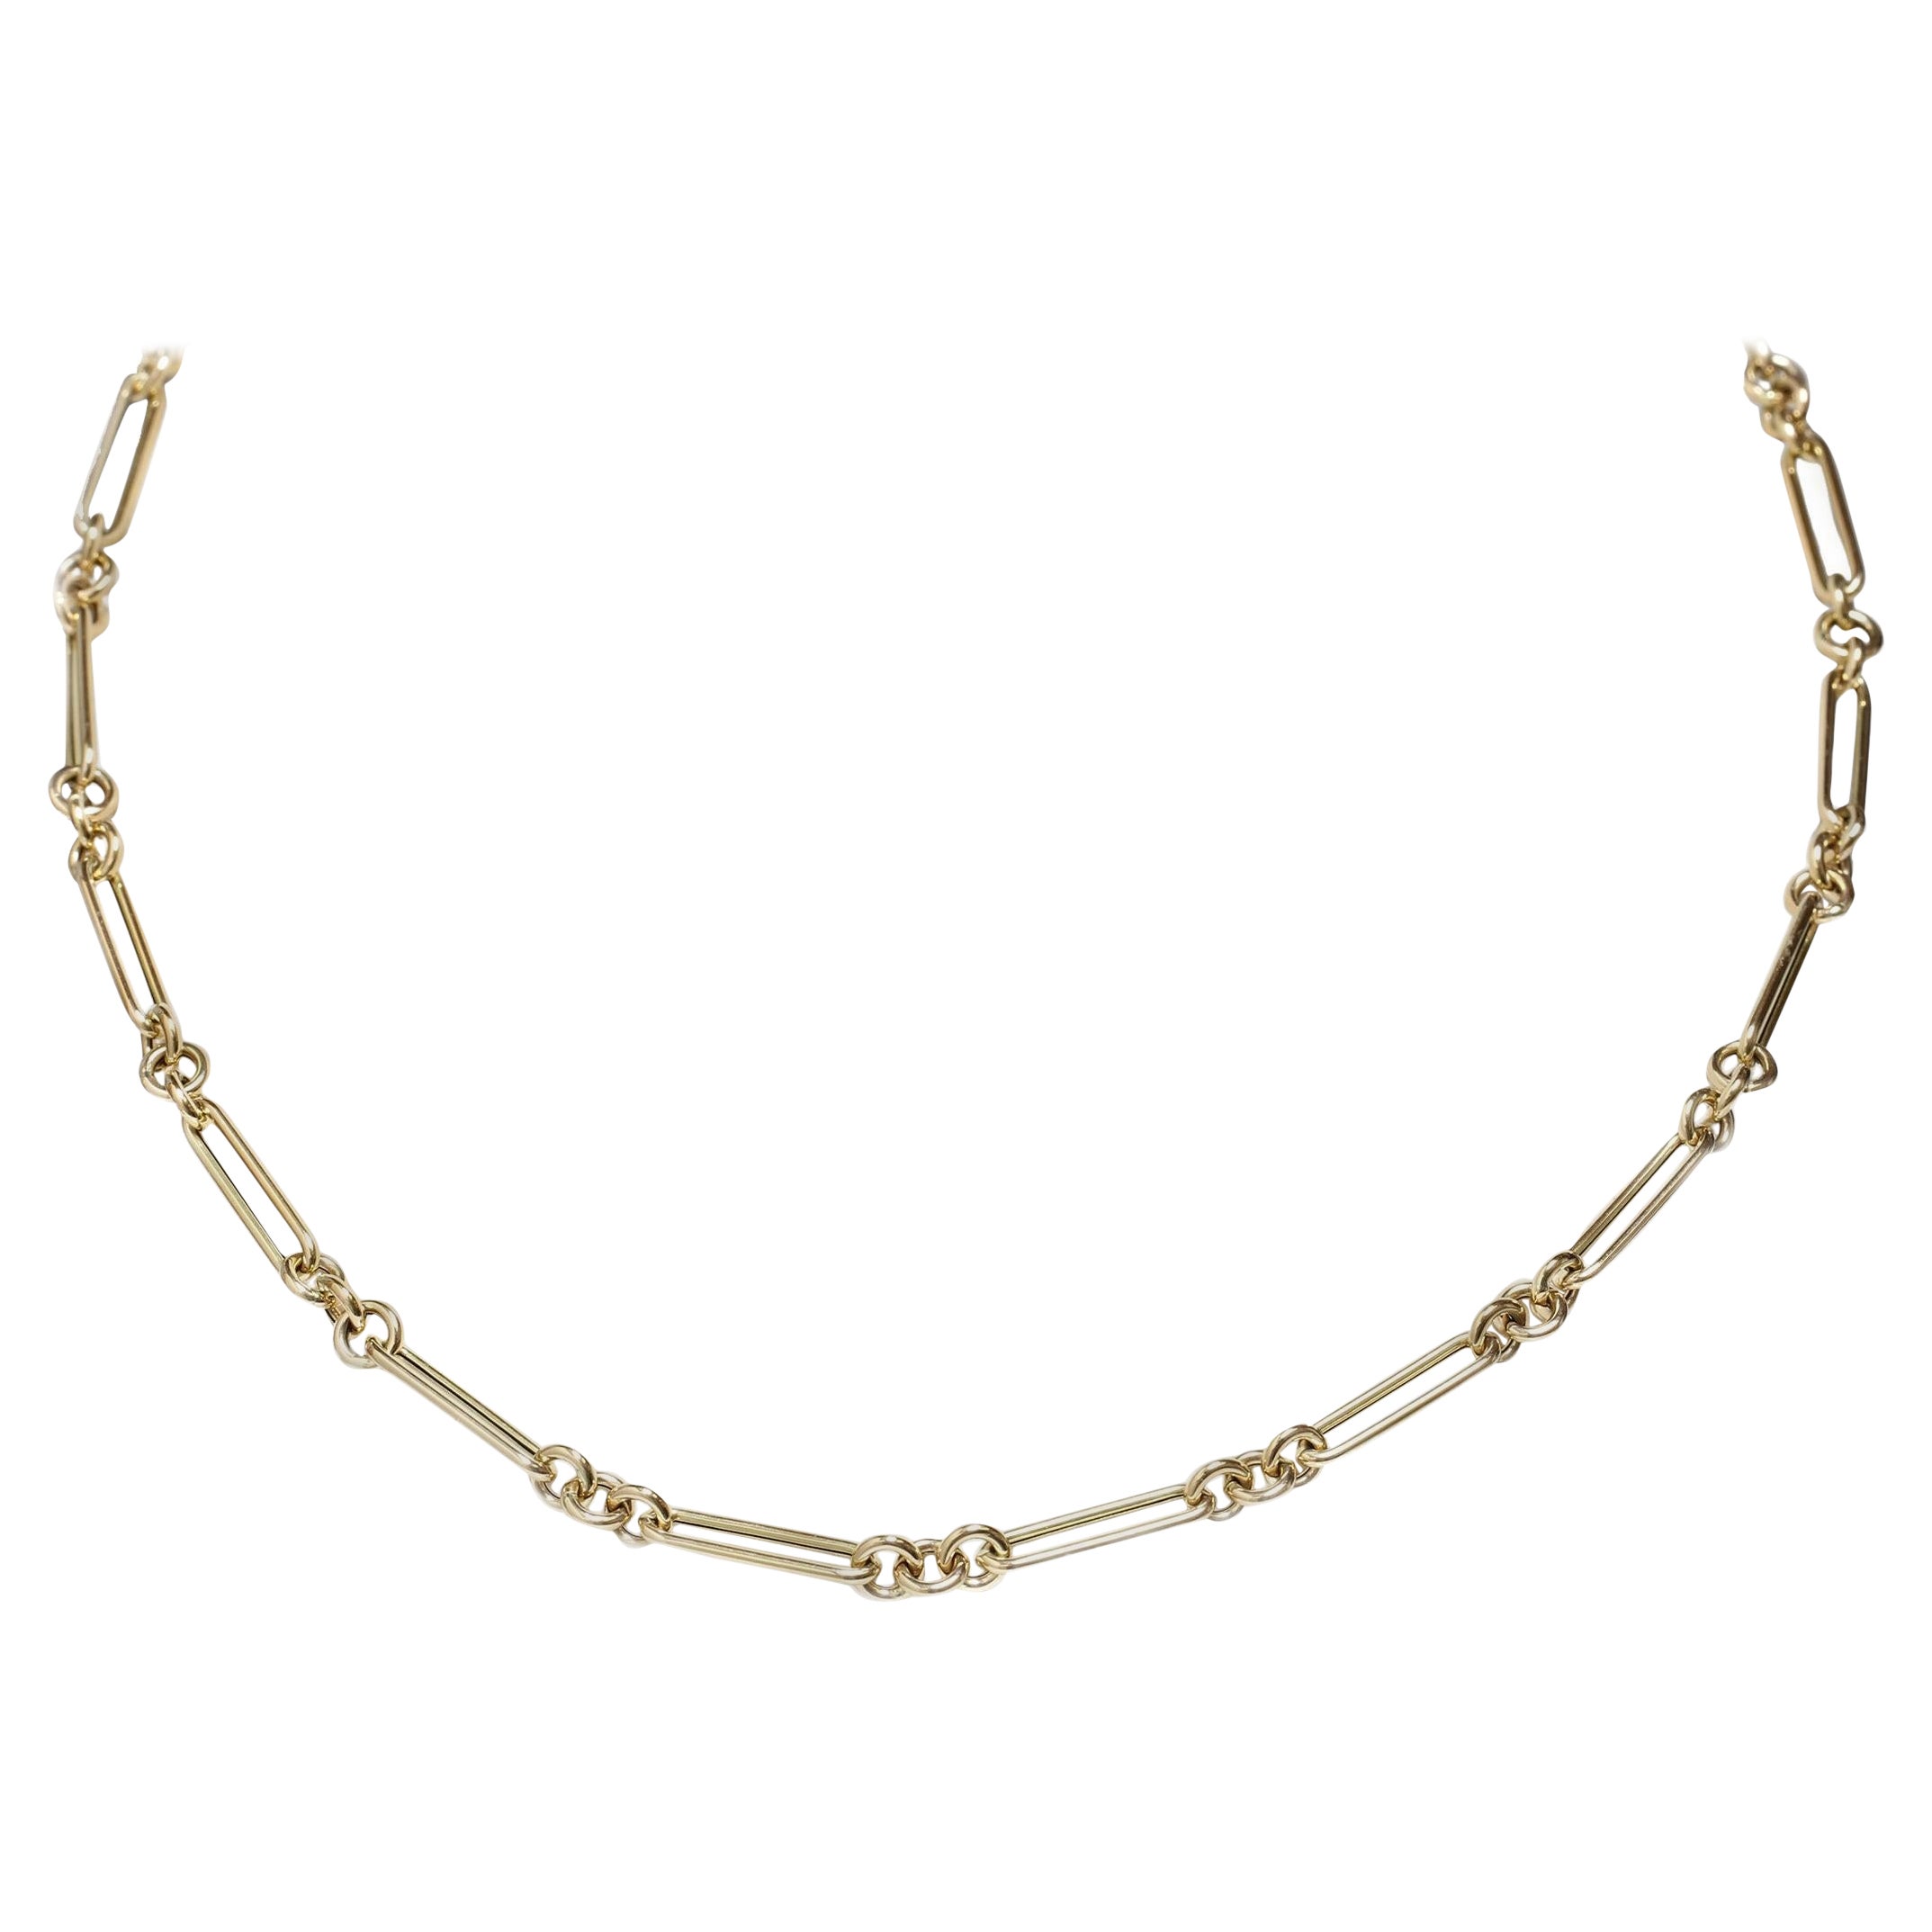 Paper Clip Link and Rolo Chain Necklace in 14K Yellow Gold - 20"